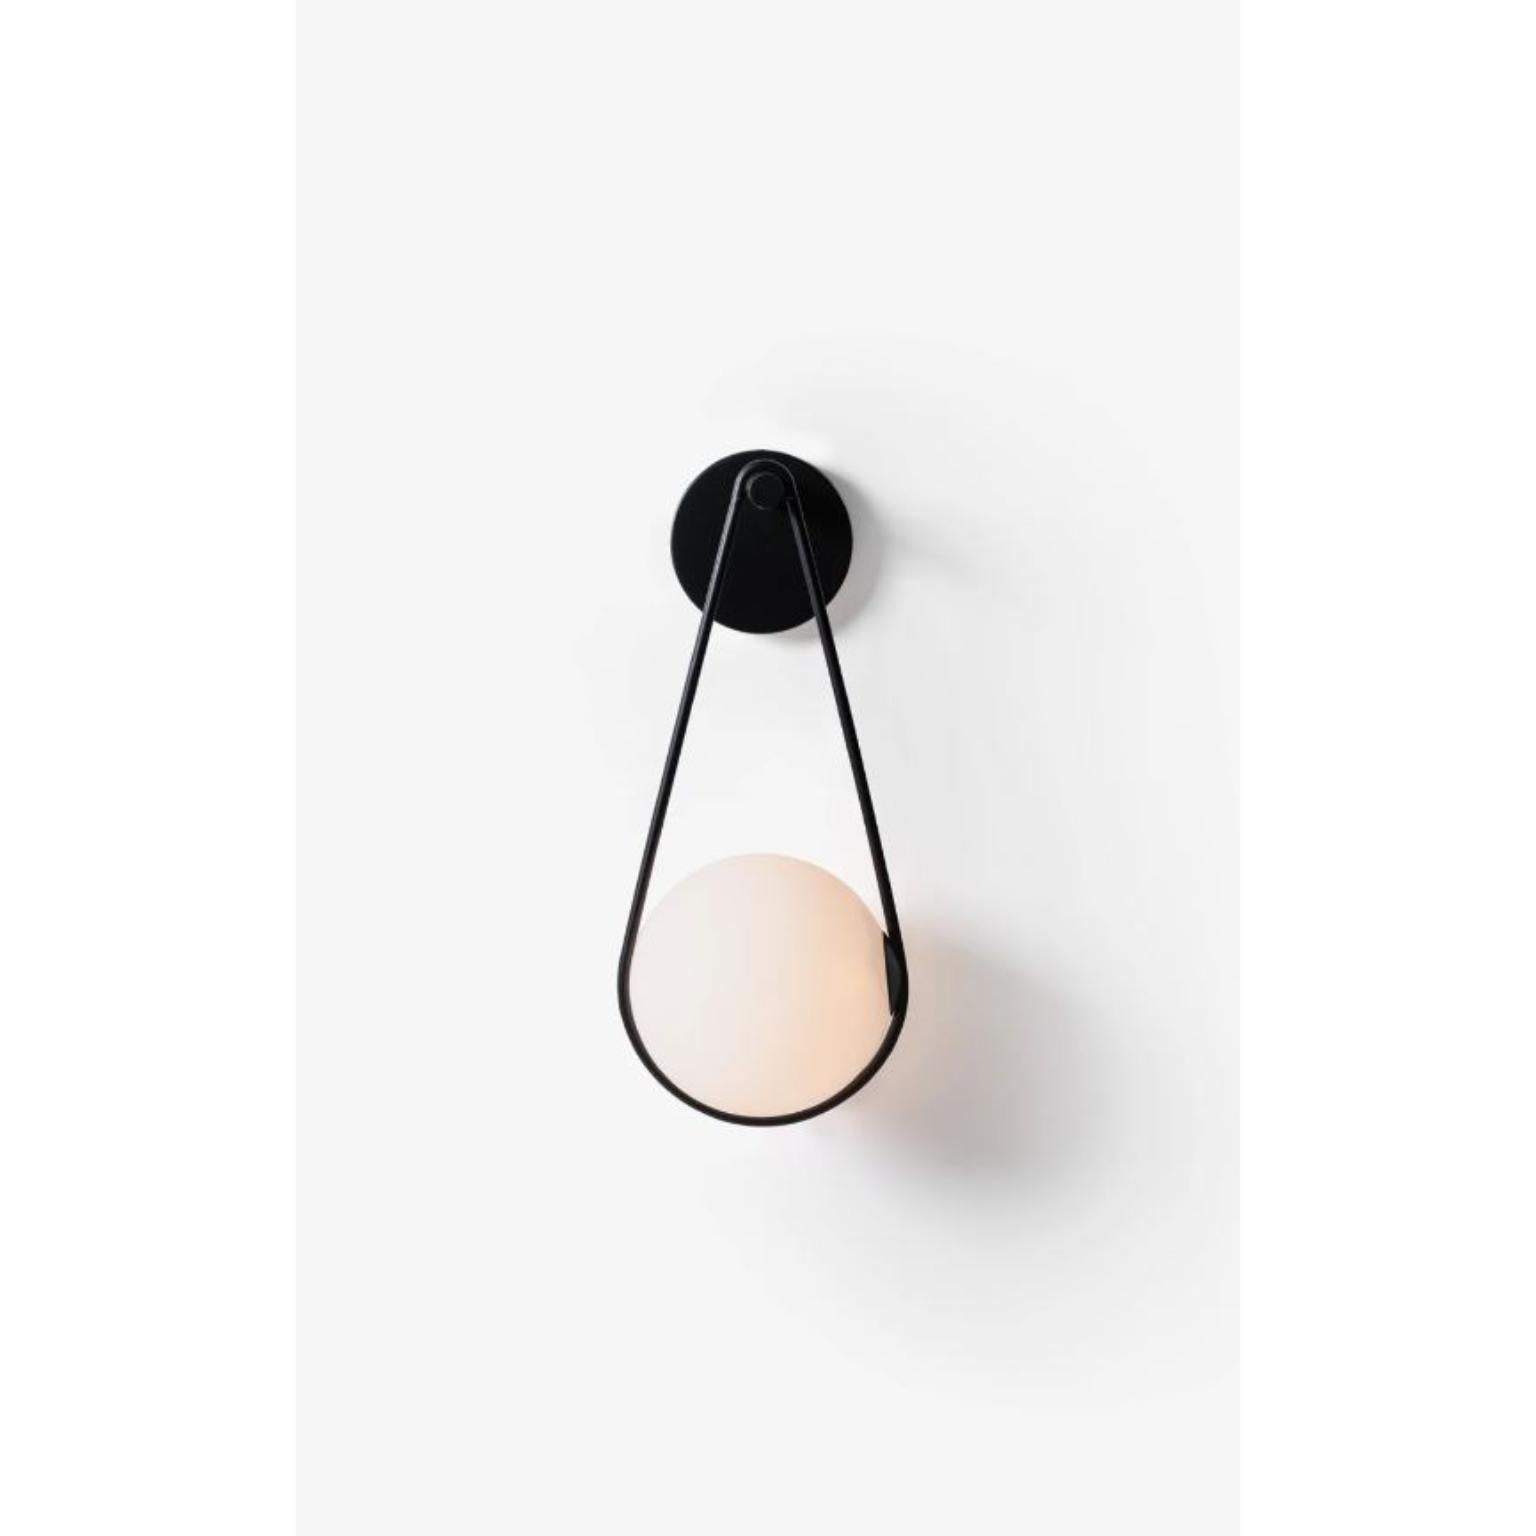 Black Corda Wall Lamp by Wentz
Dimensions: D 22 x W 22 x H 55 cm
Materials: Aluminum, Blown Glass.


WEIGHT: 1,2kg / 2,6 lbs
Colors: Black, White
LIGHT SOURCE: Built-in LED. 150lm. 2700K. 80 CRI.
DIMMING ELV @ 120VAC.
VOLTAGE: 120-277V -